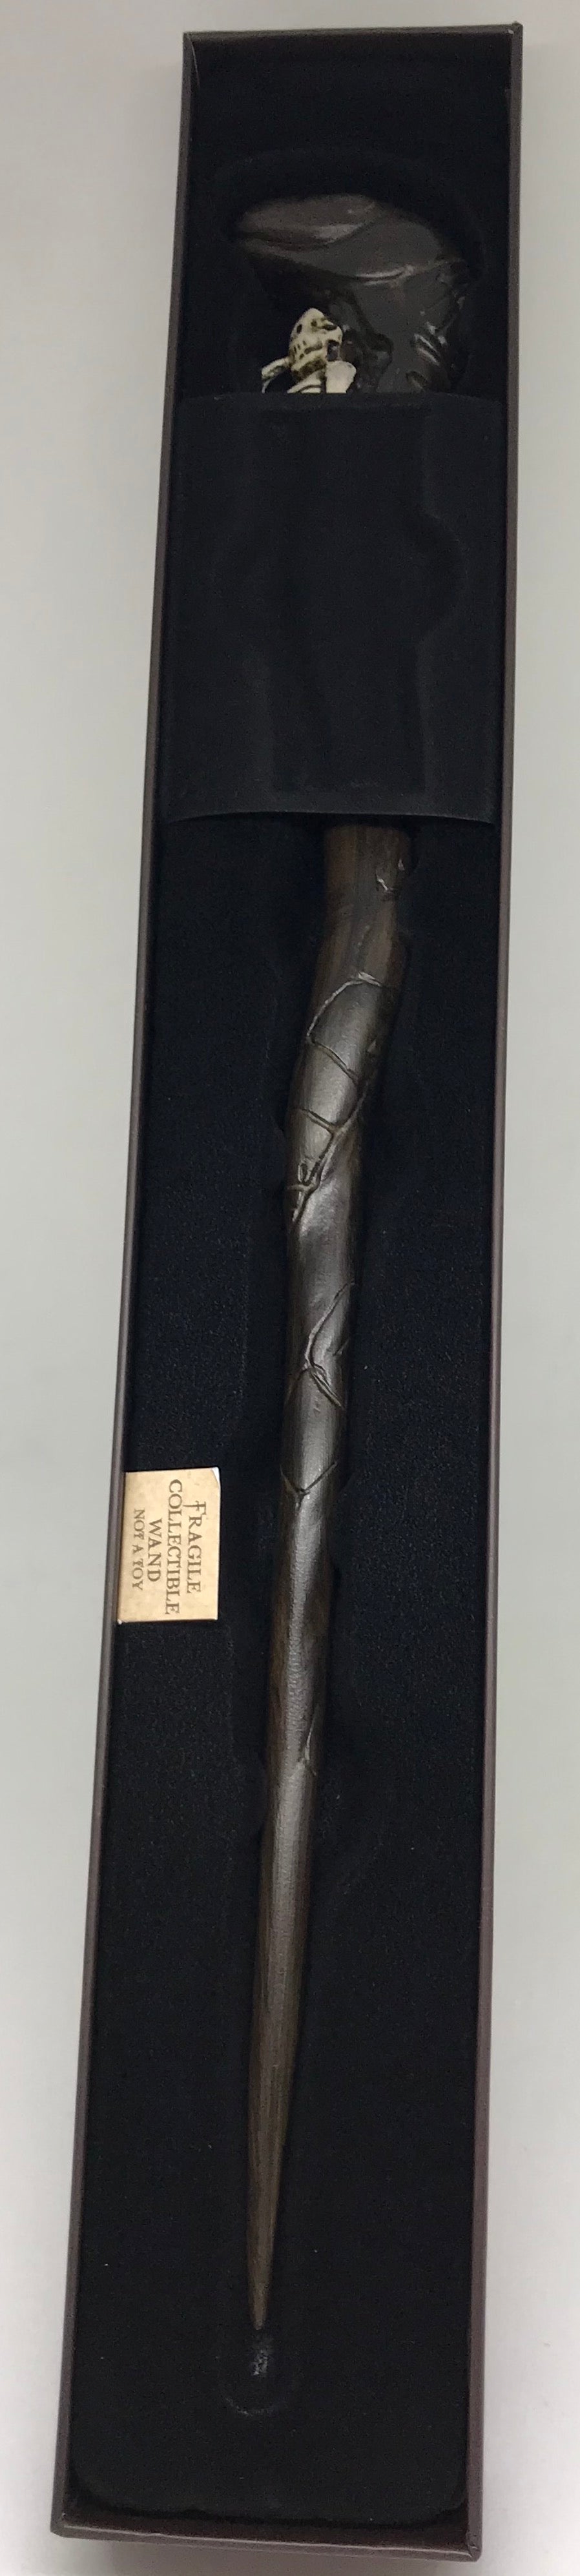 Universal Studios Death Eater Wand From Harry Potter New with Box